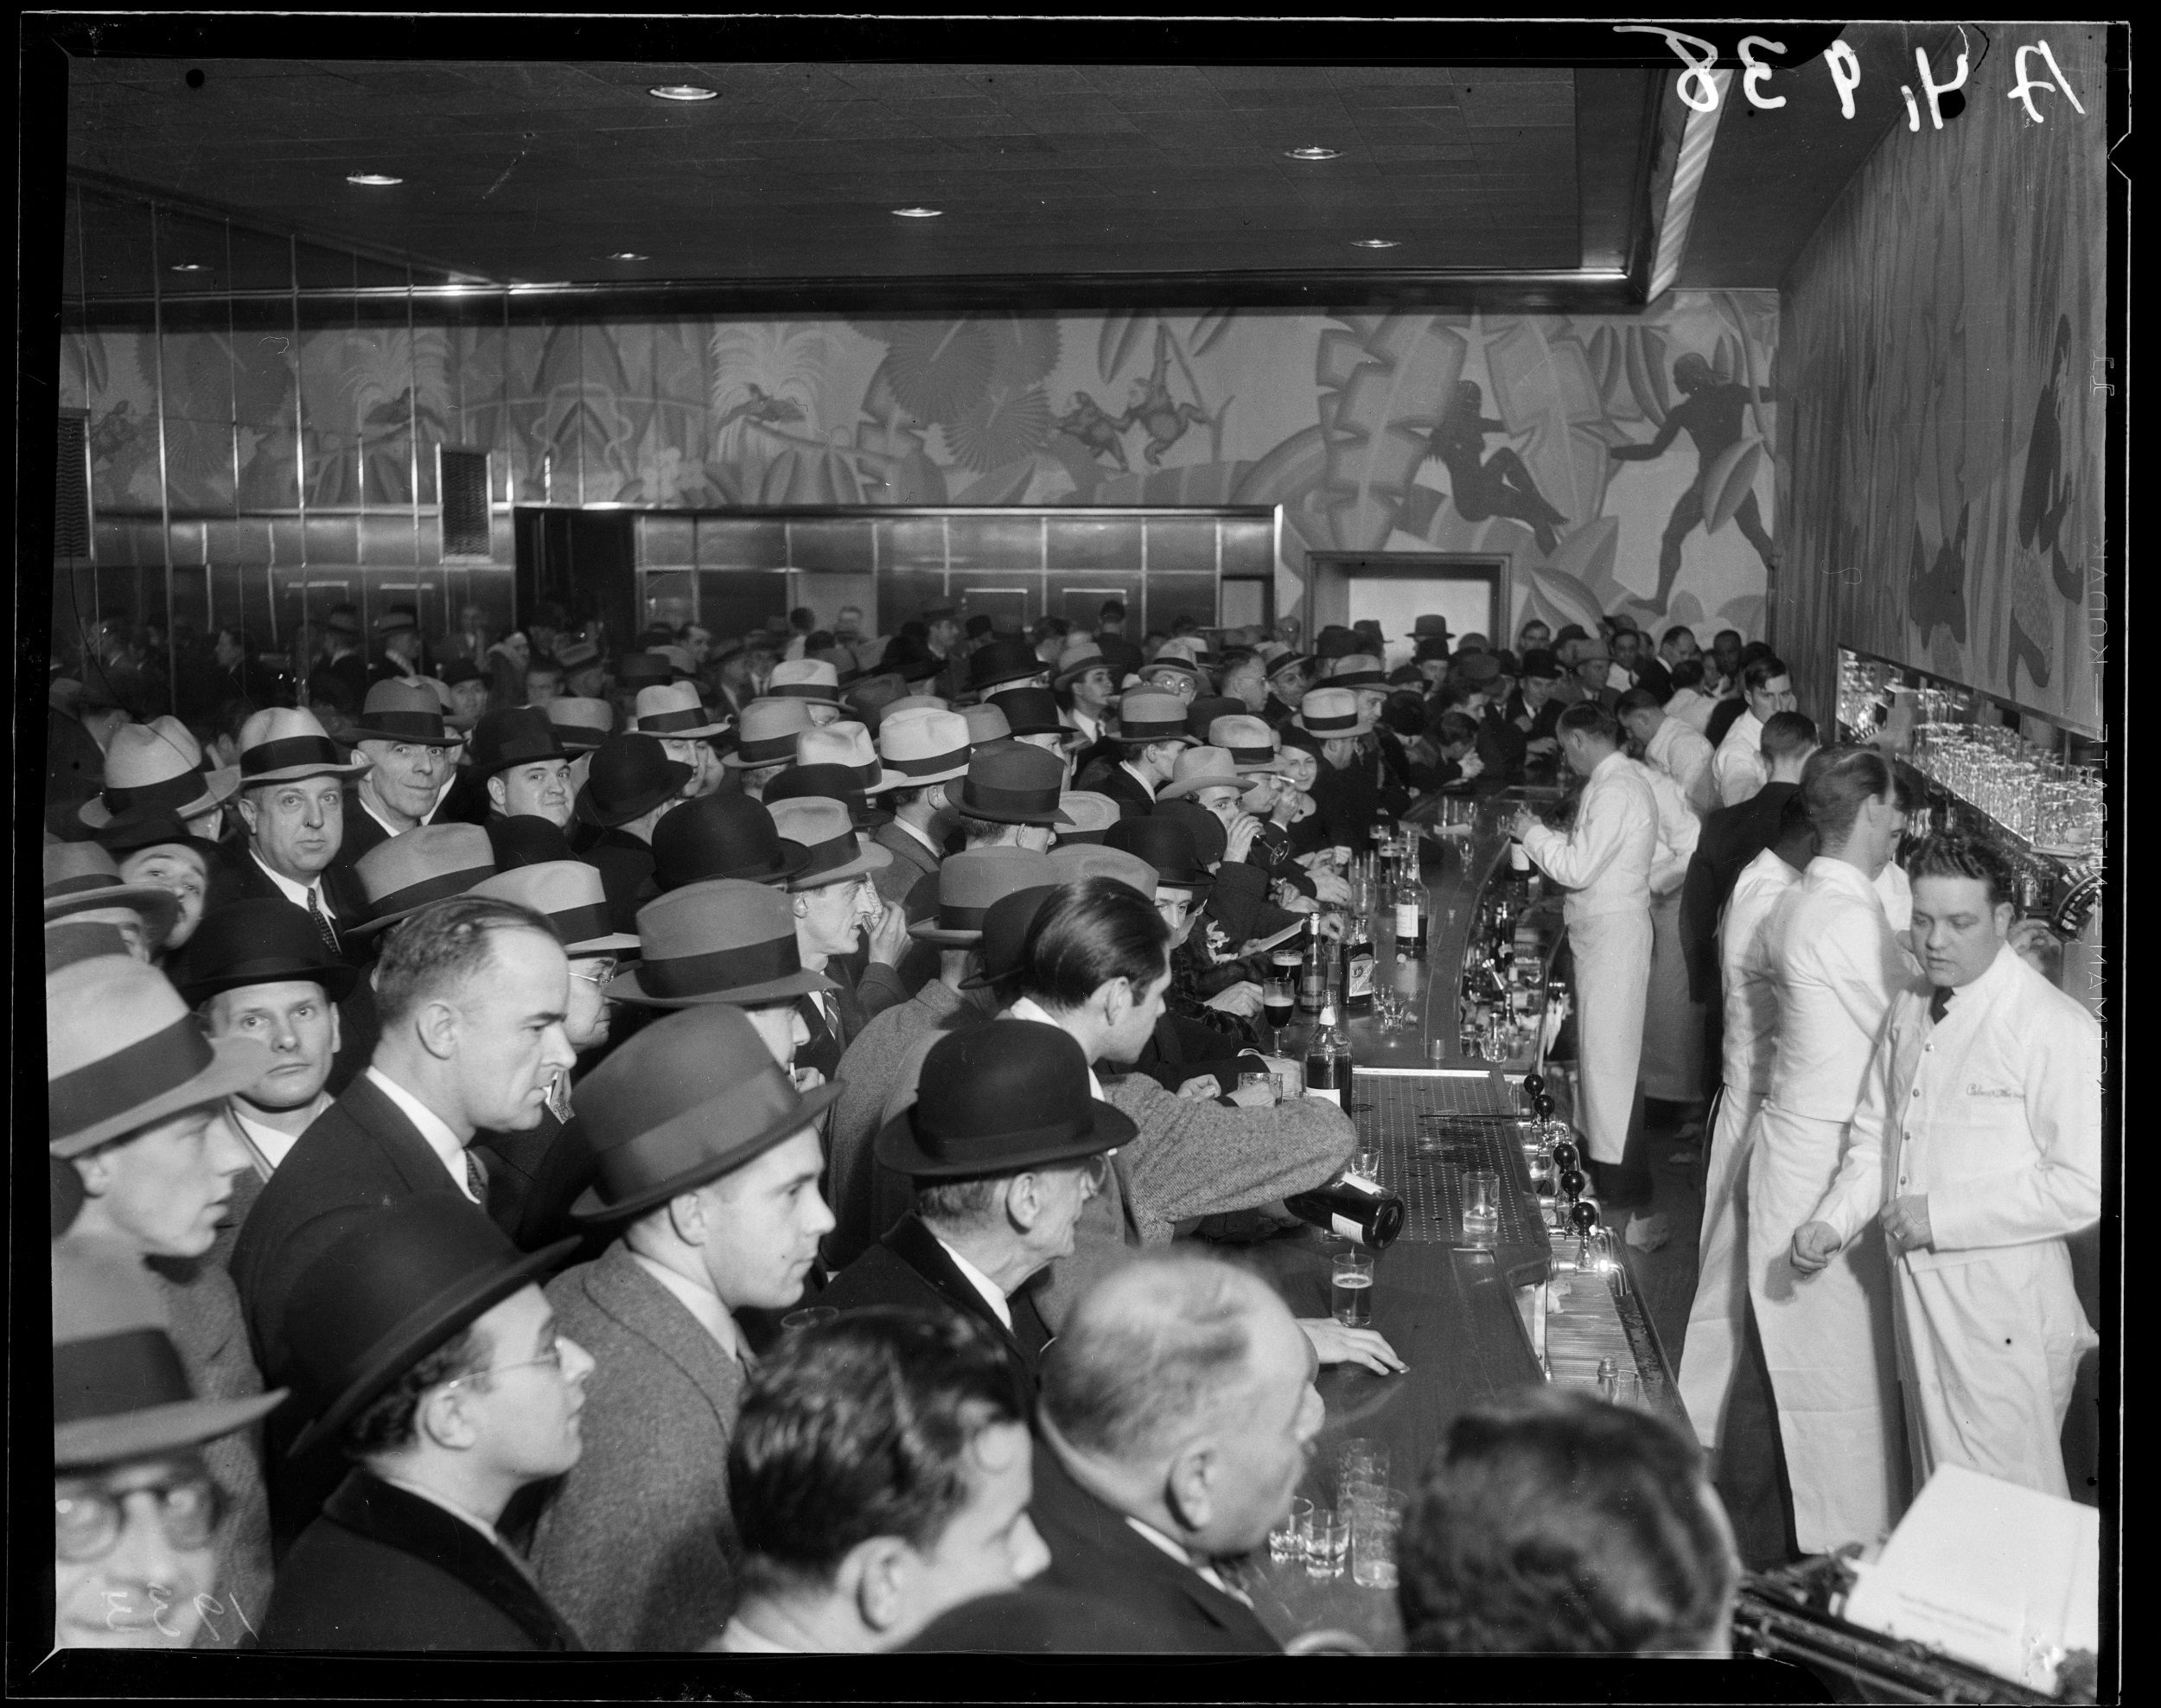 Crowds jamming the bar during the repeal of prohibition at the Palmer House Bar, featuring a Balinese scene mural painted by Honore Palmer Jr., inside the Palmer House Hotel located at 17 East Monroe Street, Chicago, Illinois, circa 1934.